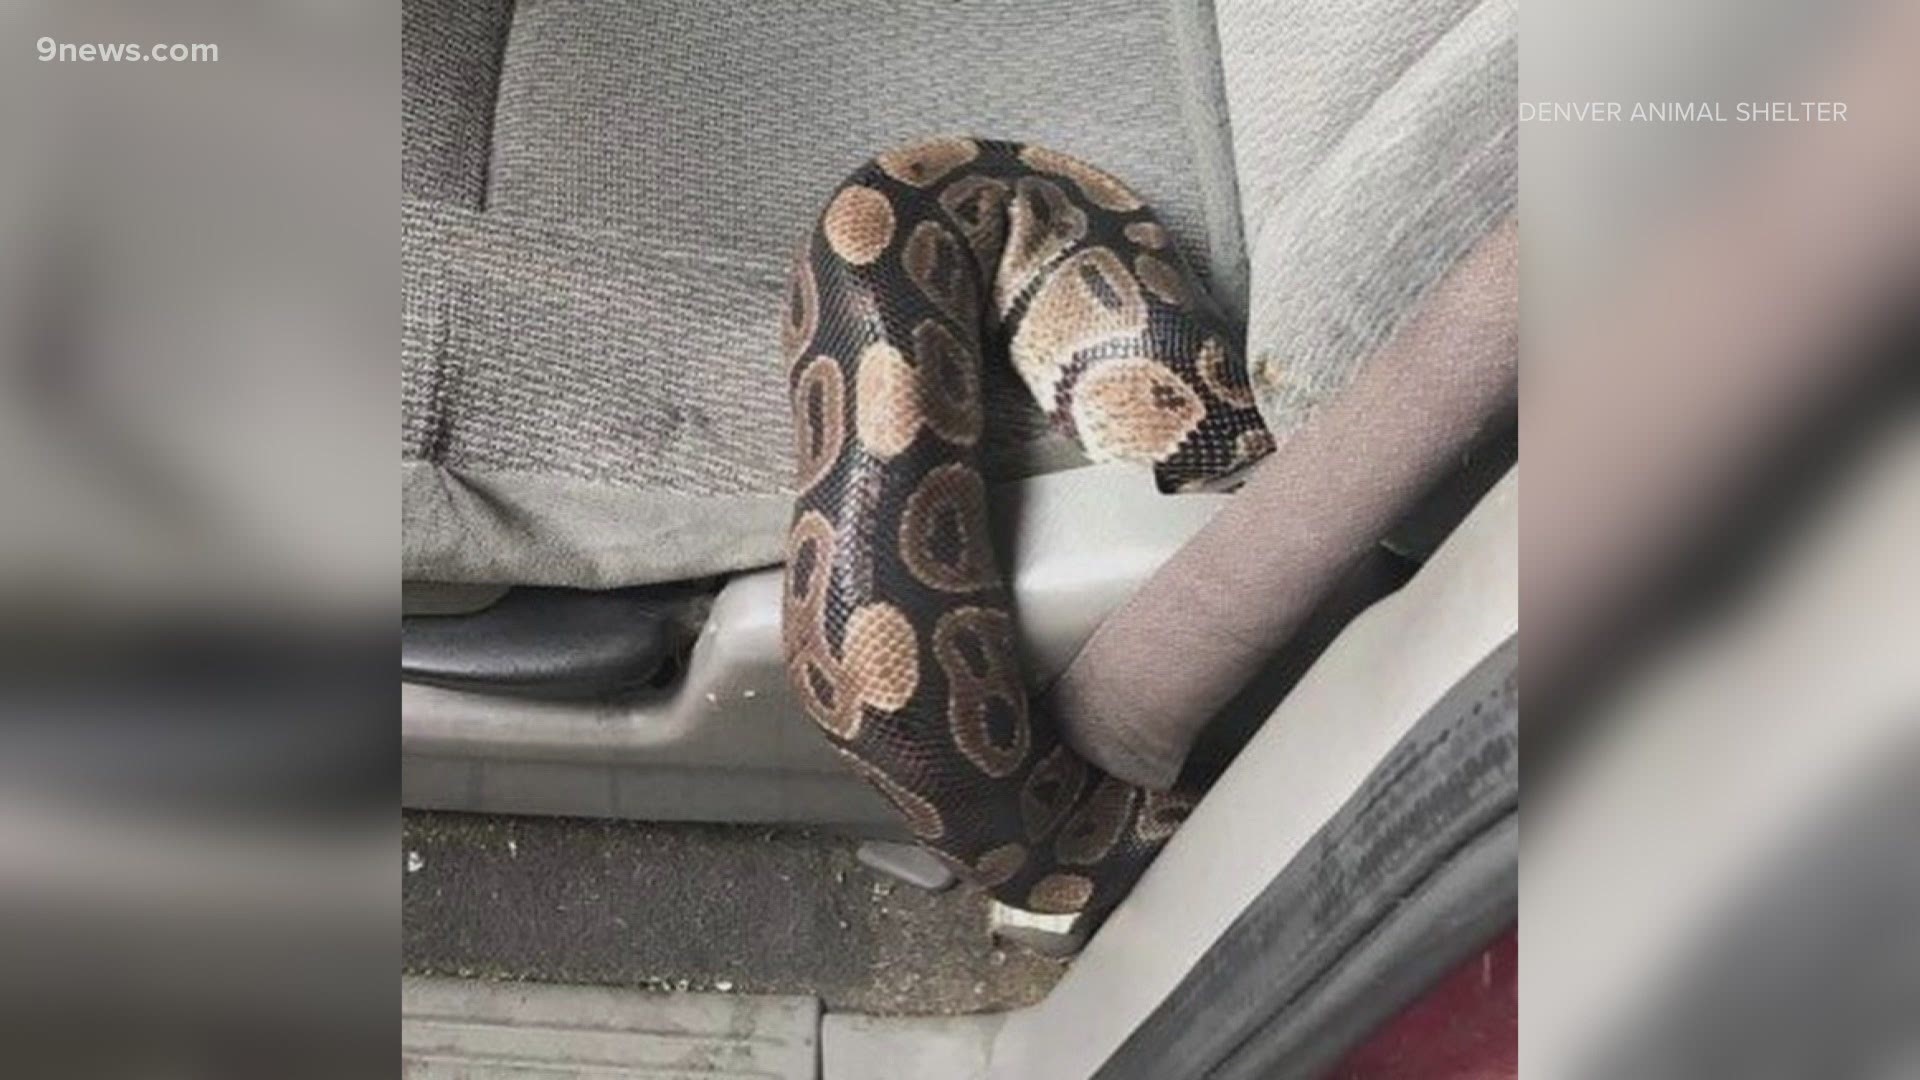 Animal protection officers asked the owner to find a way to contain the snakes during future rides.